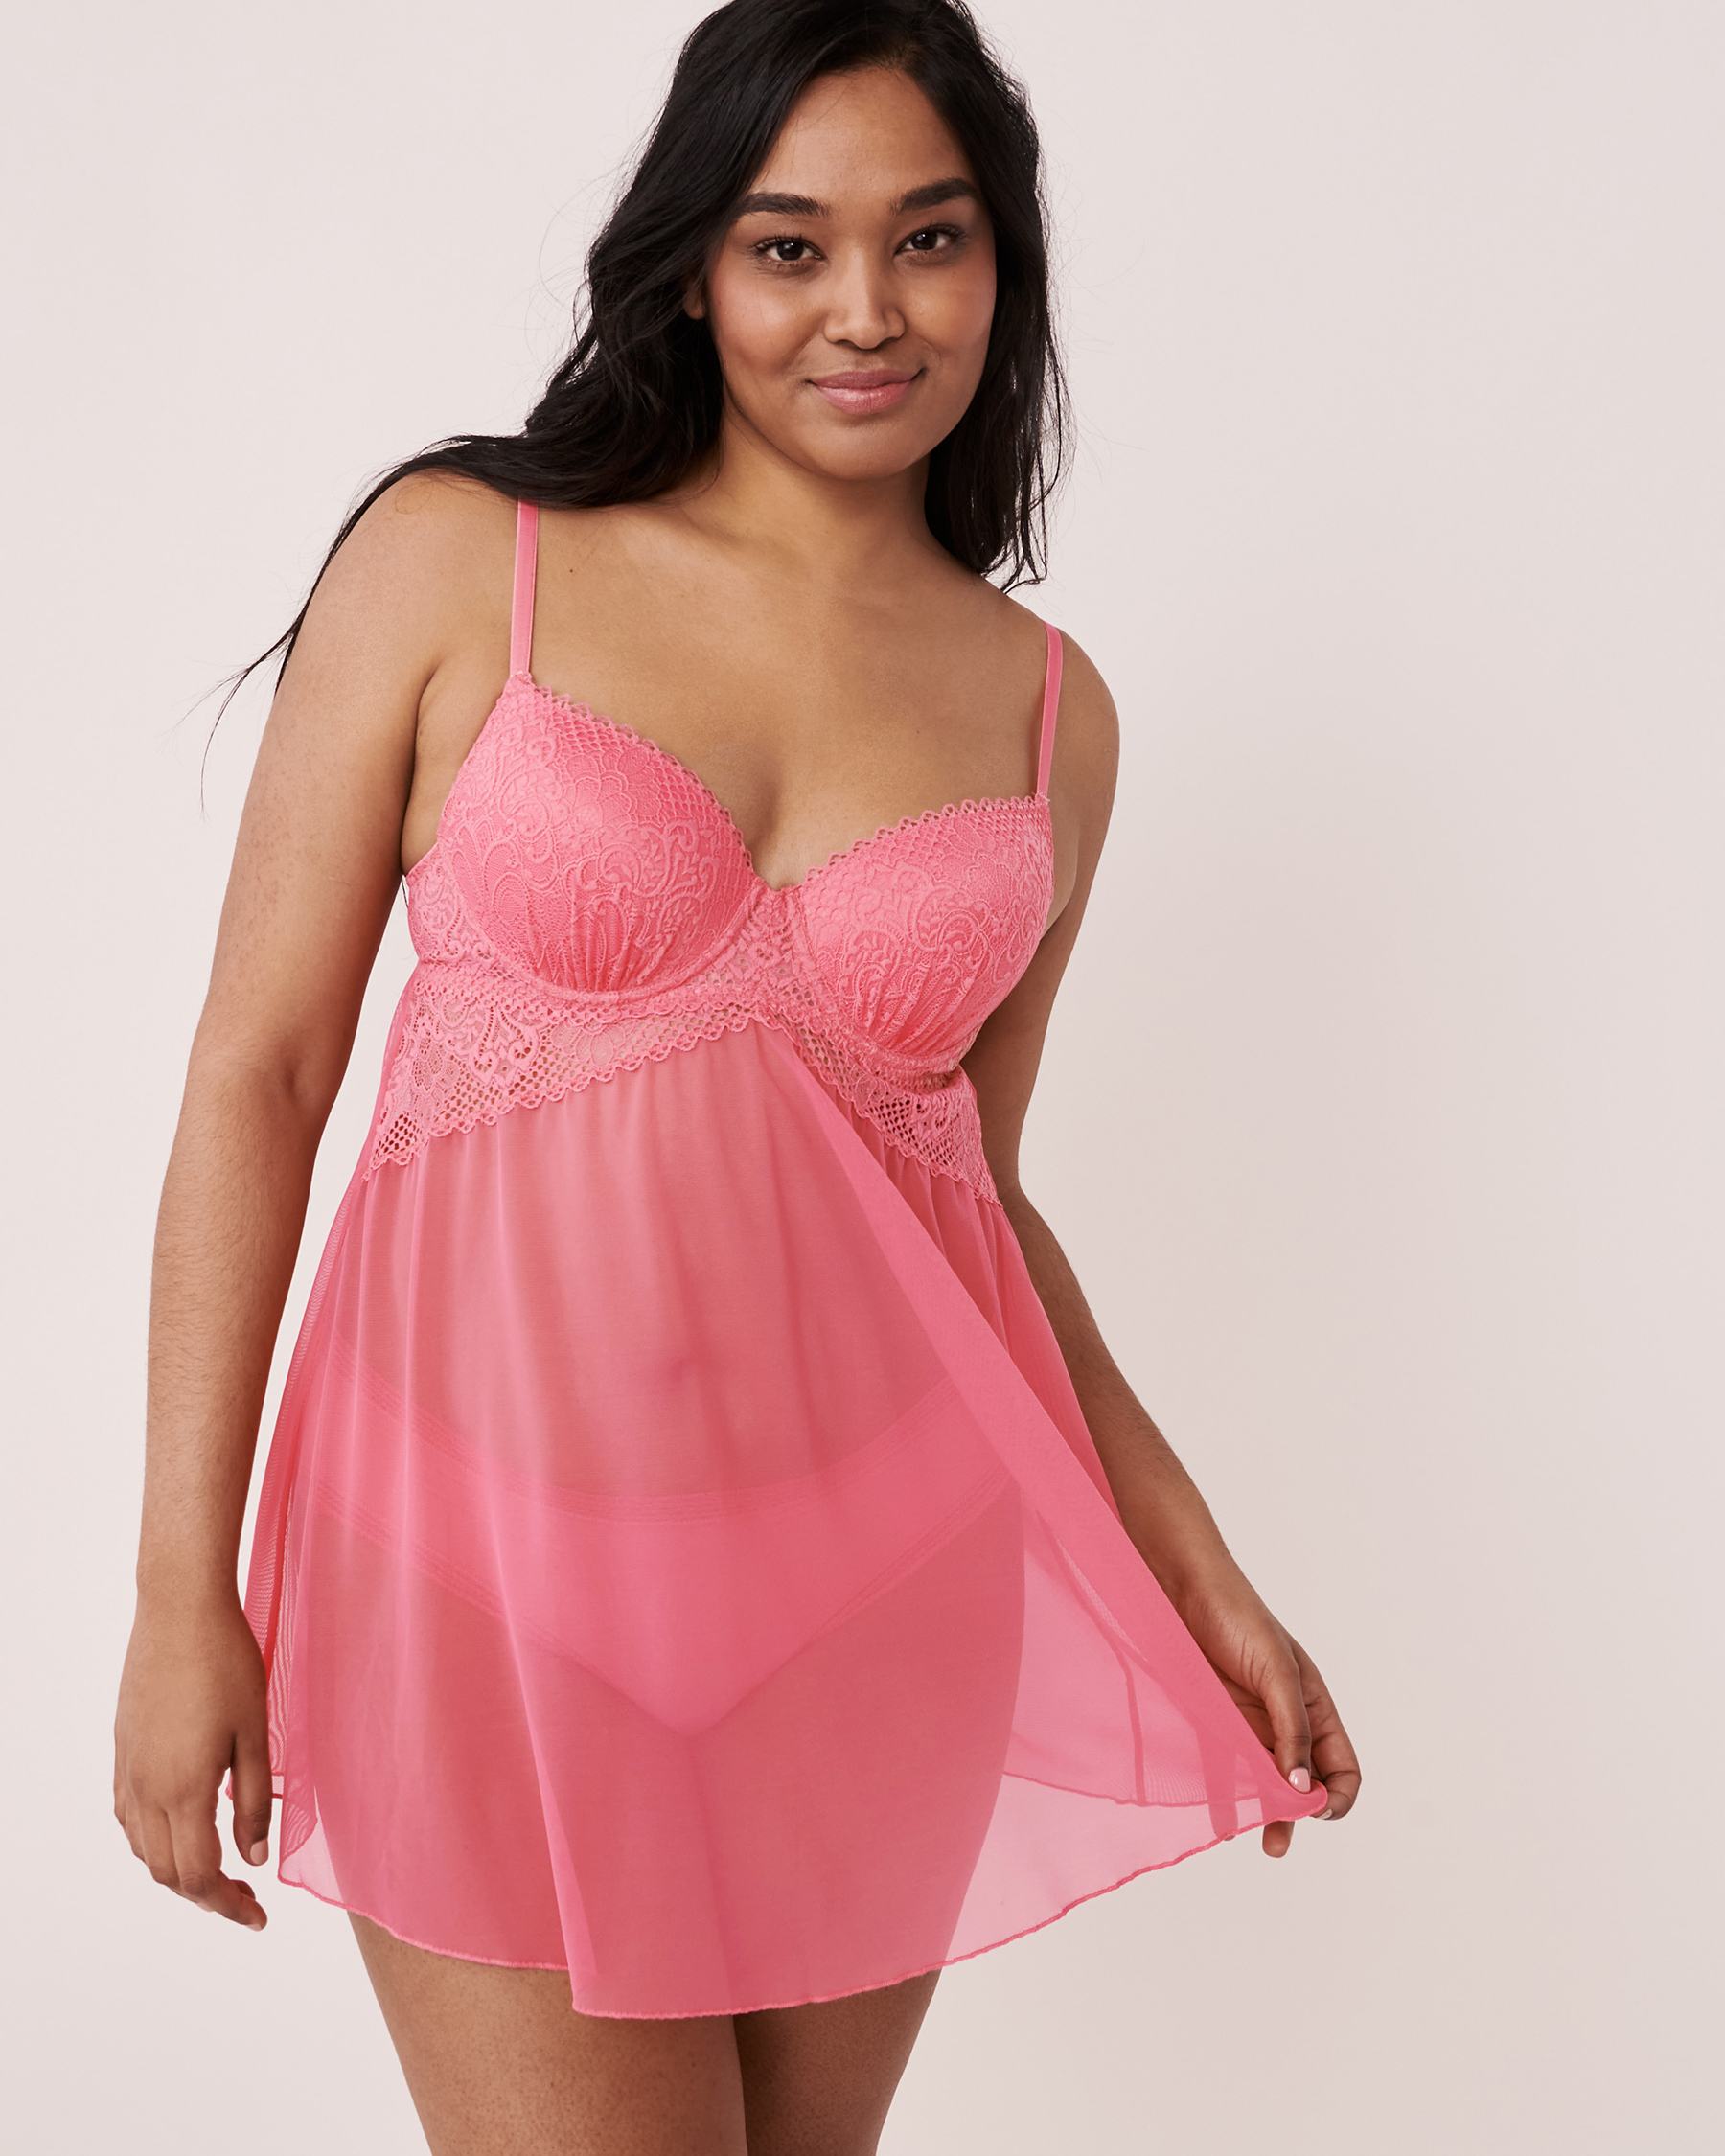 LA VIE EN ROSE Lace and Mesh Push-up Babydoll Candy pink 60500051 - View1